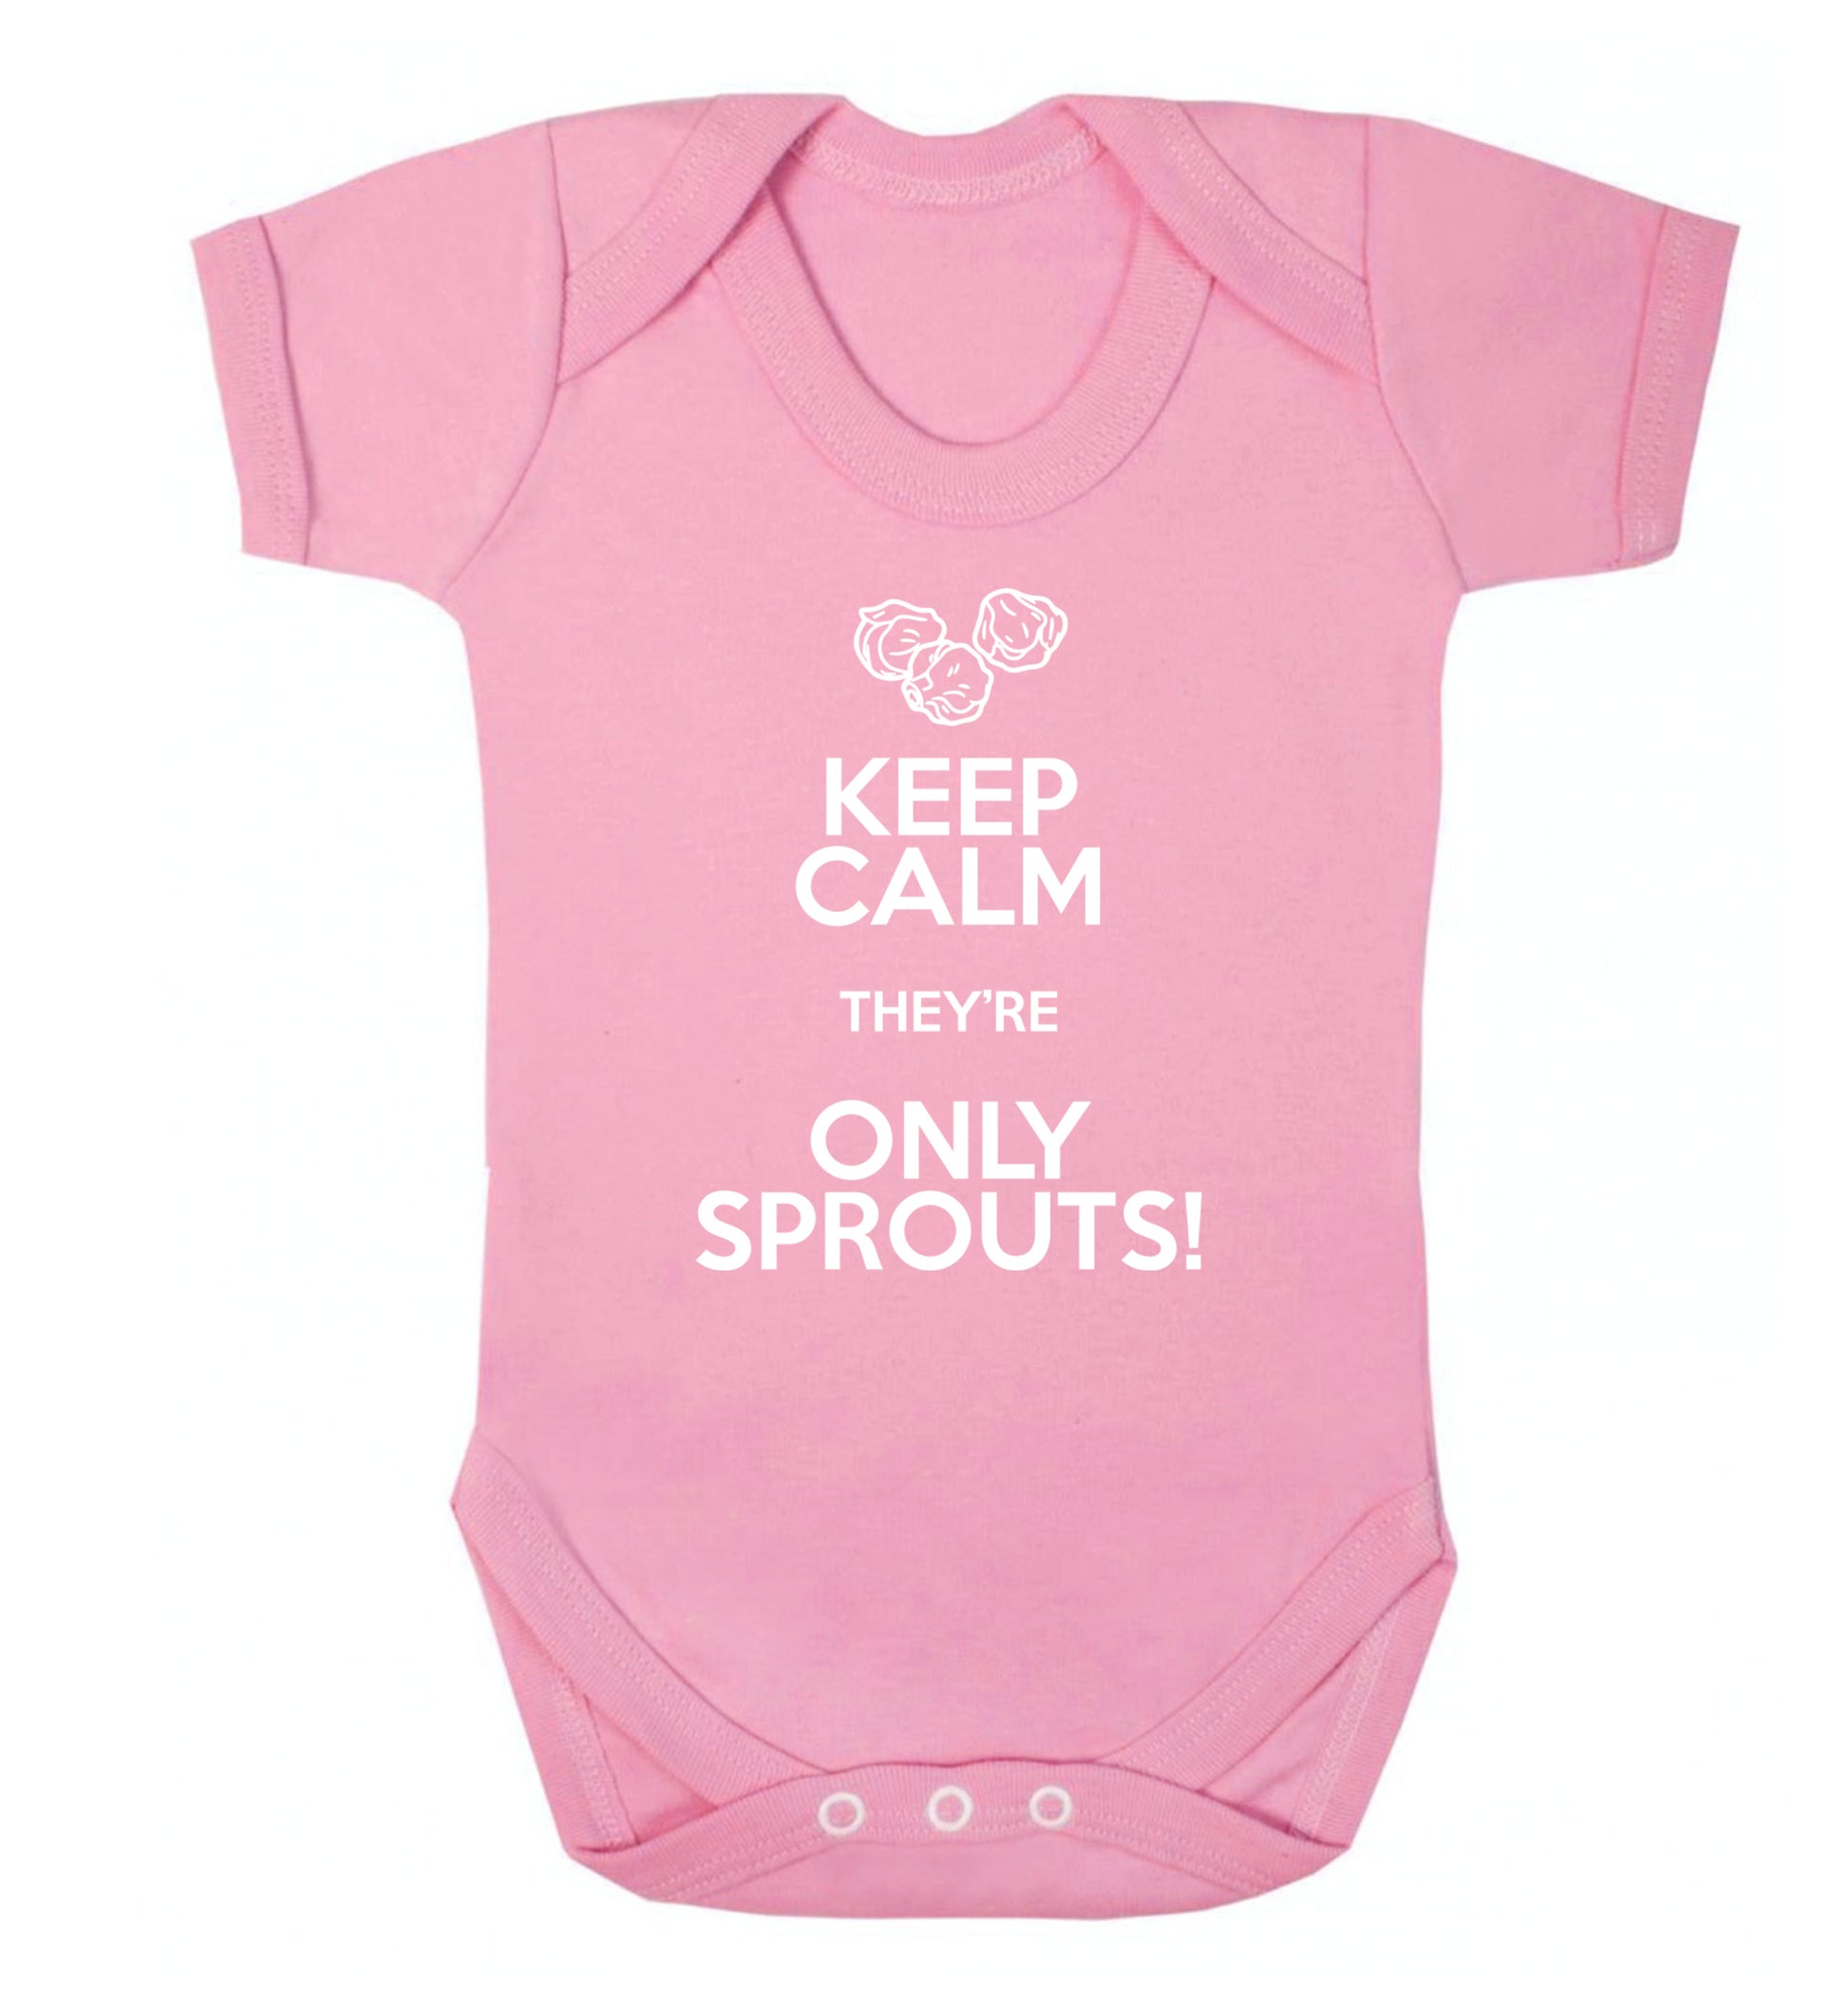 Keep calm they're only sprouts Baby Vest pale pink 18-24 months